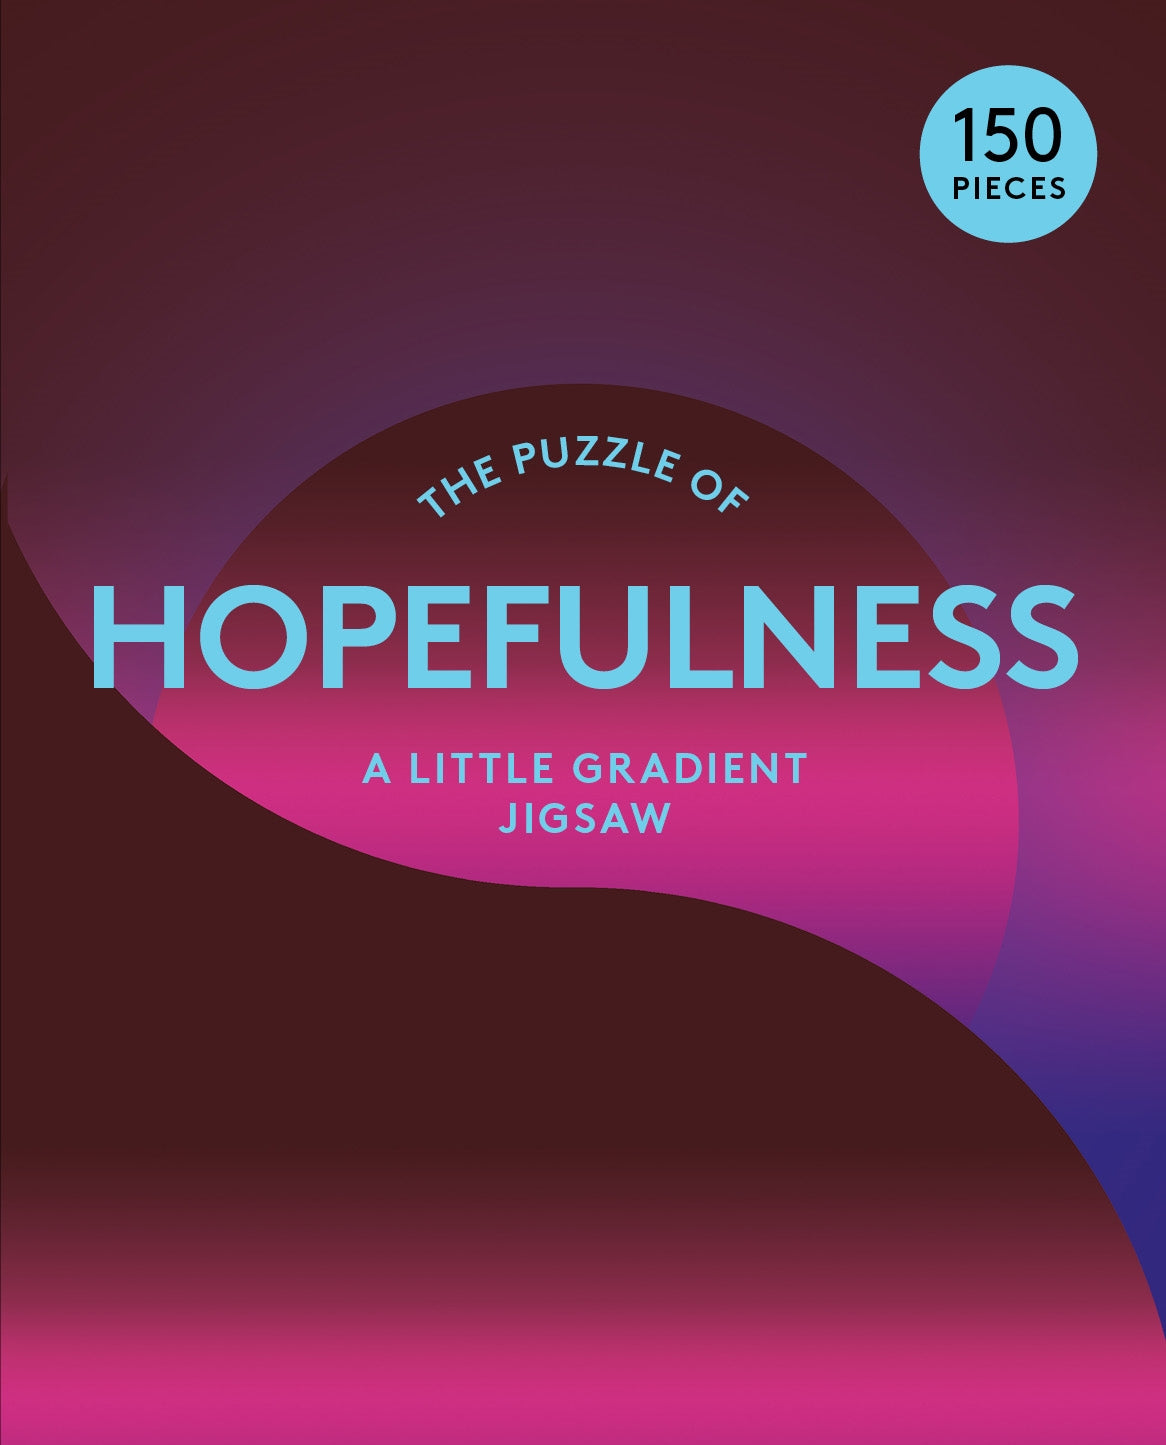 The Puzzle of Hopefulness by Therese Vandling, Susan Broomhall